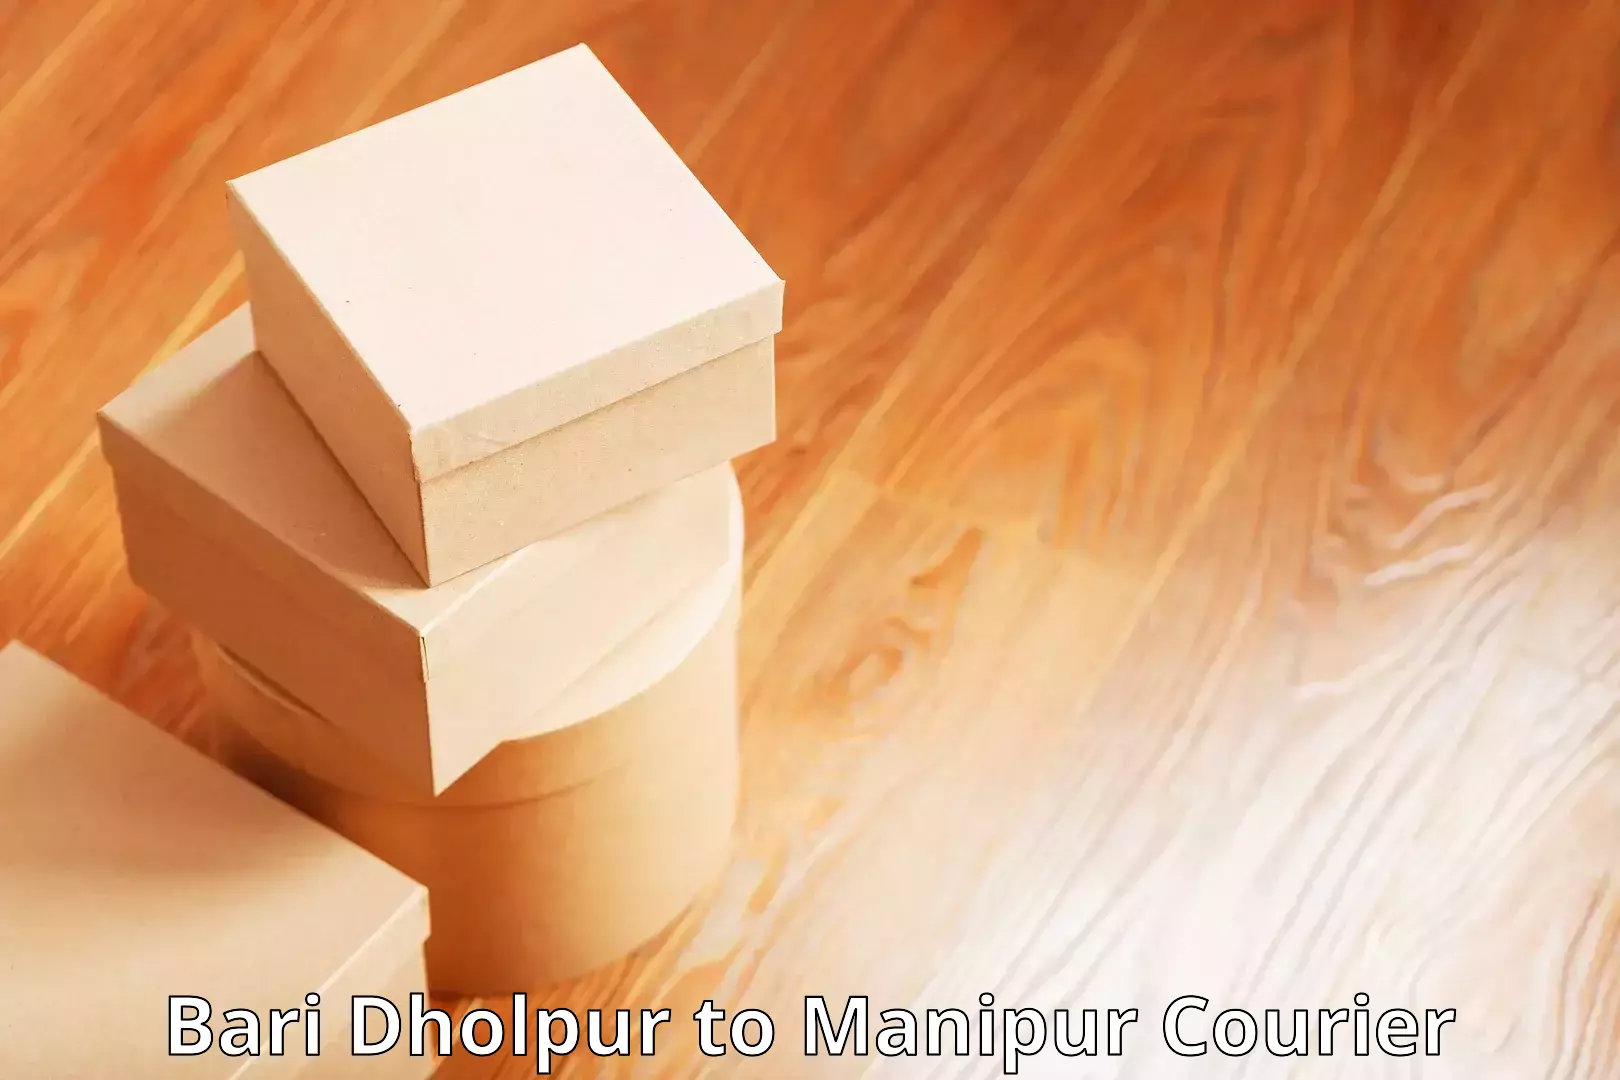 Fast delivery service Bari Dholpur to Manipur